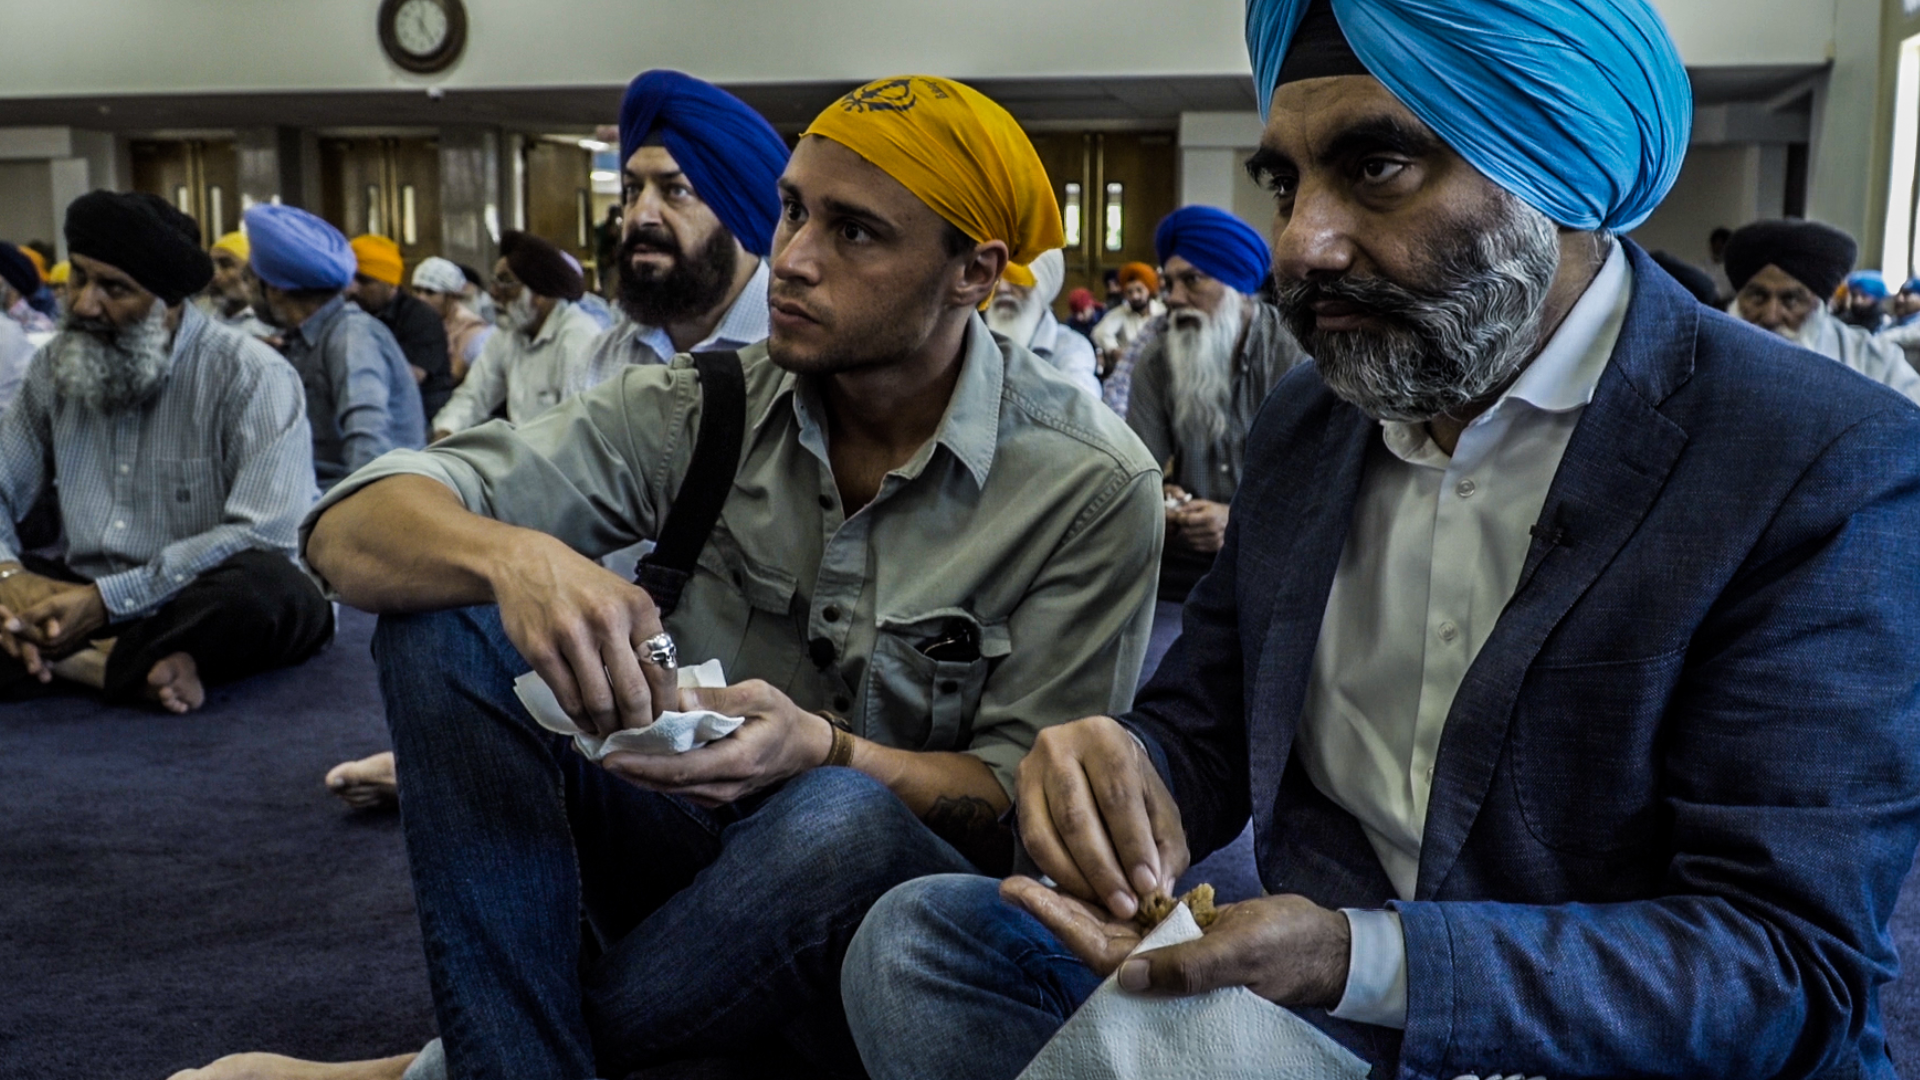 ABC10's Michael Anthony Adams takes a look at what it's like being Sikh in the time of intolerance.